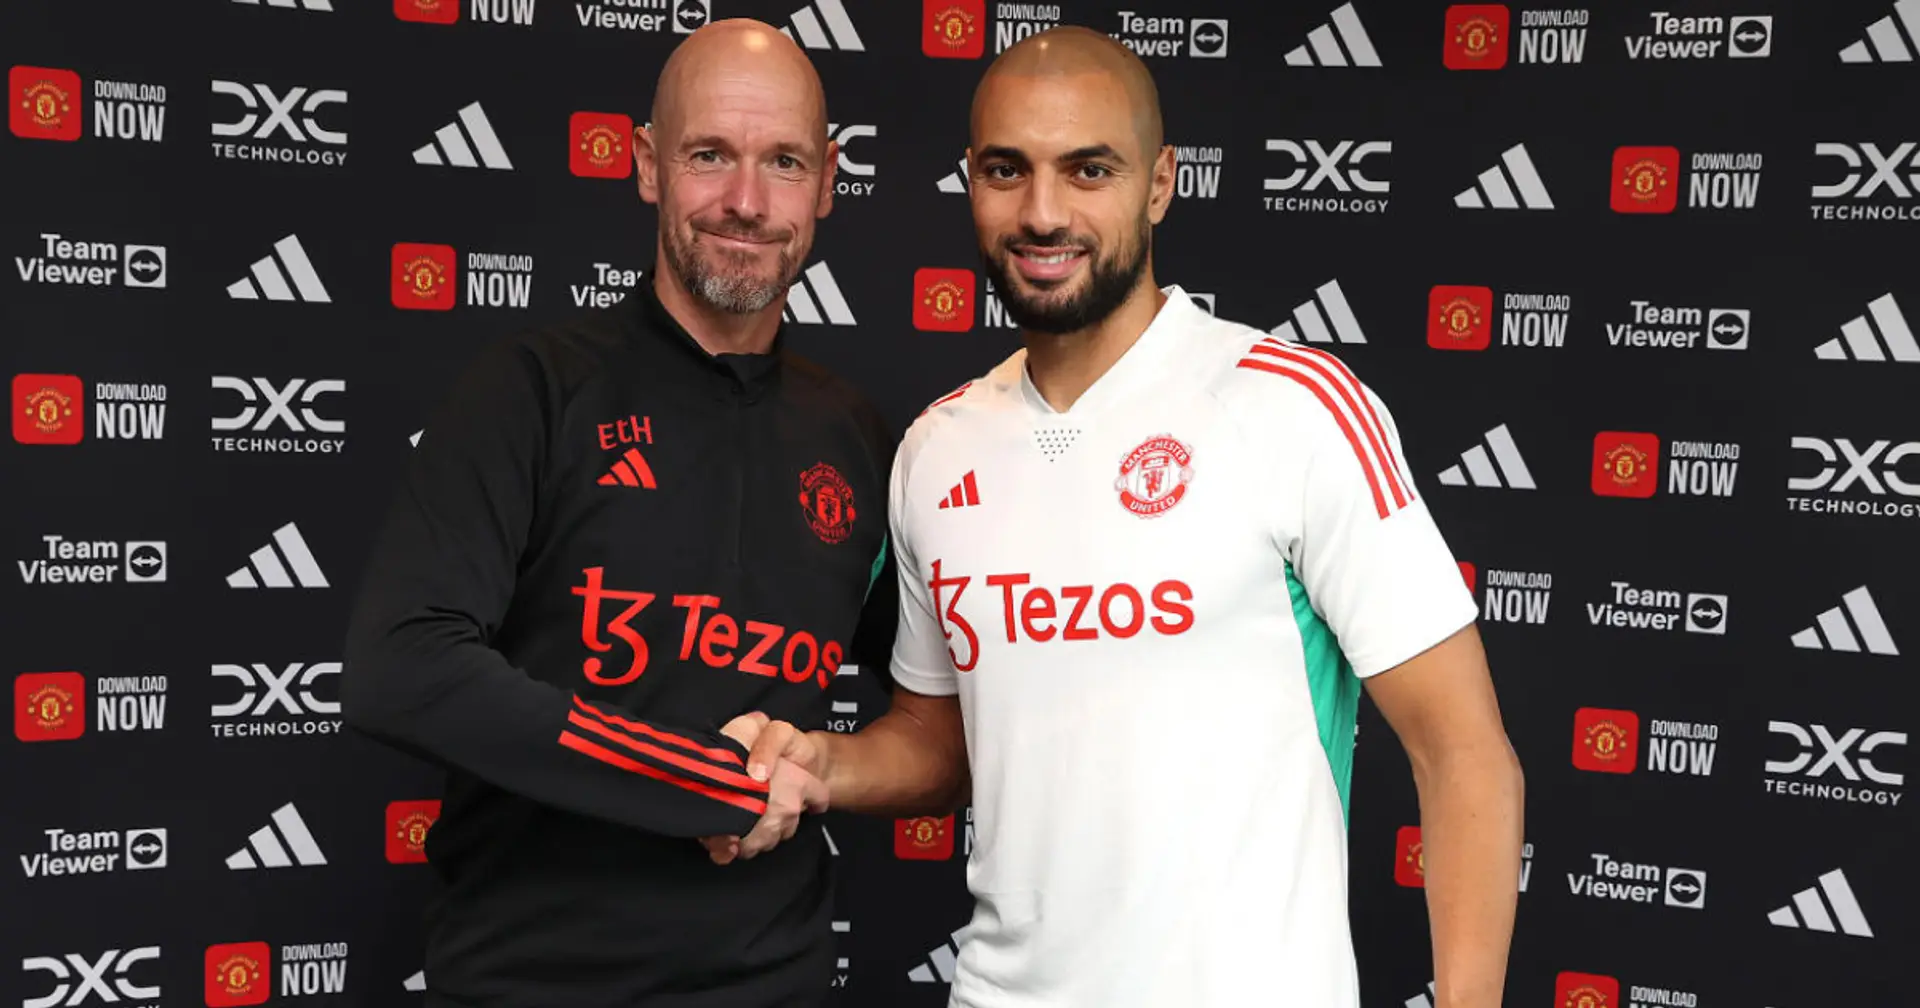 'One of the most important people in my career': Sofyan Amrabat reveals details about his bond with Erik ten Hag